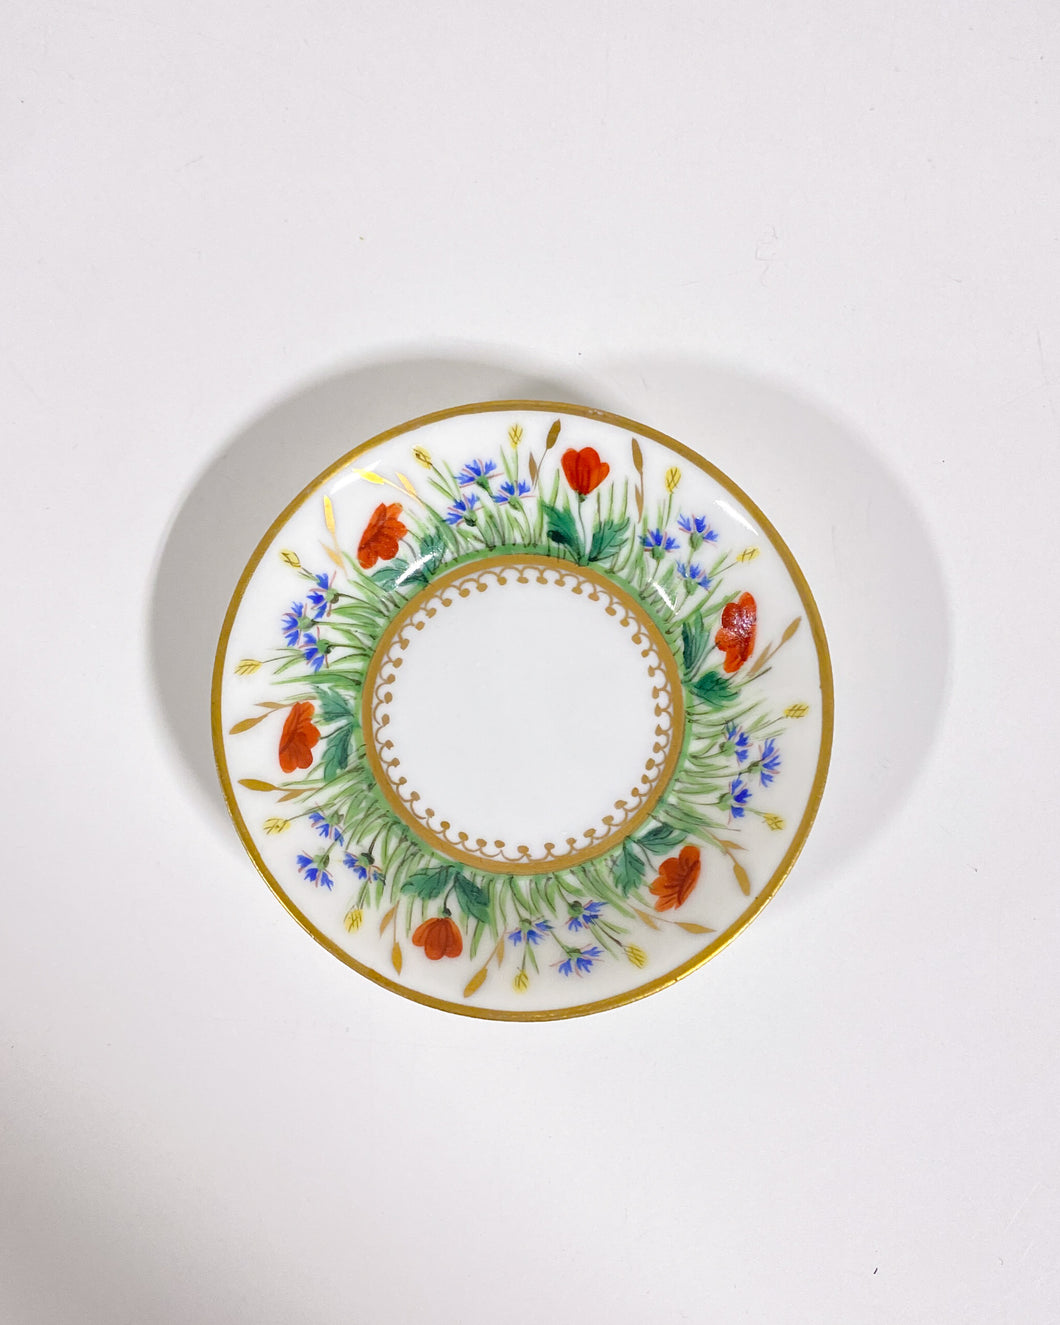 Mini Porcelain Floral Plate - Made in France